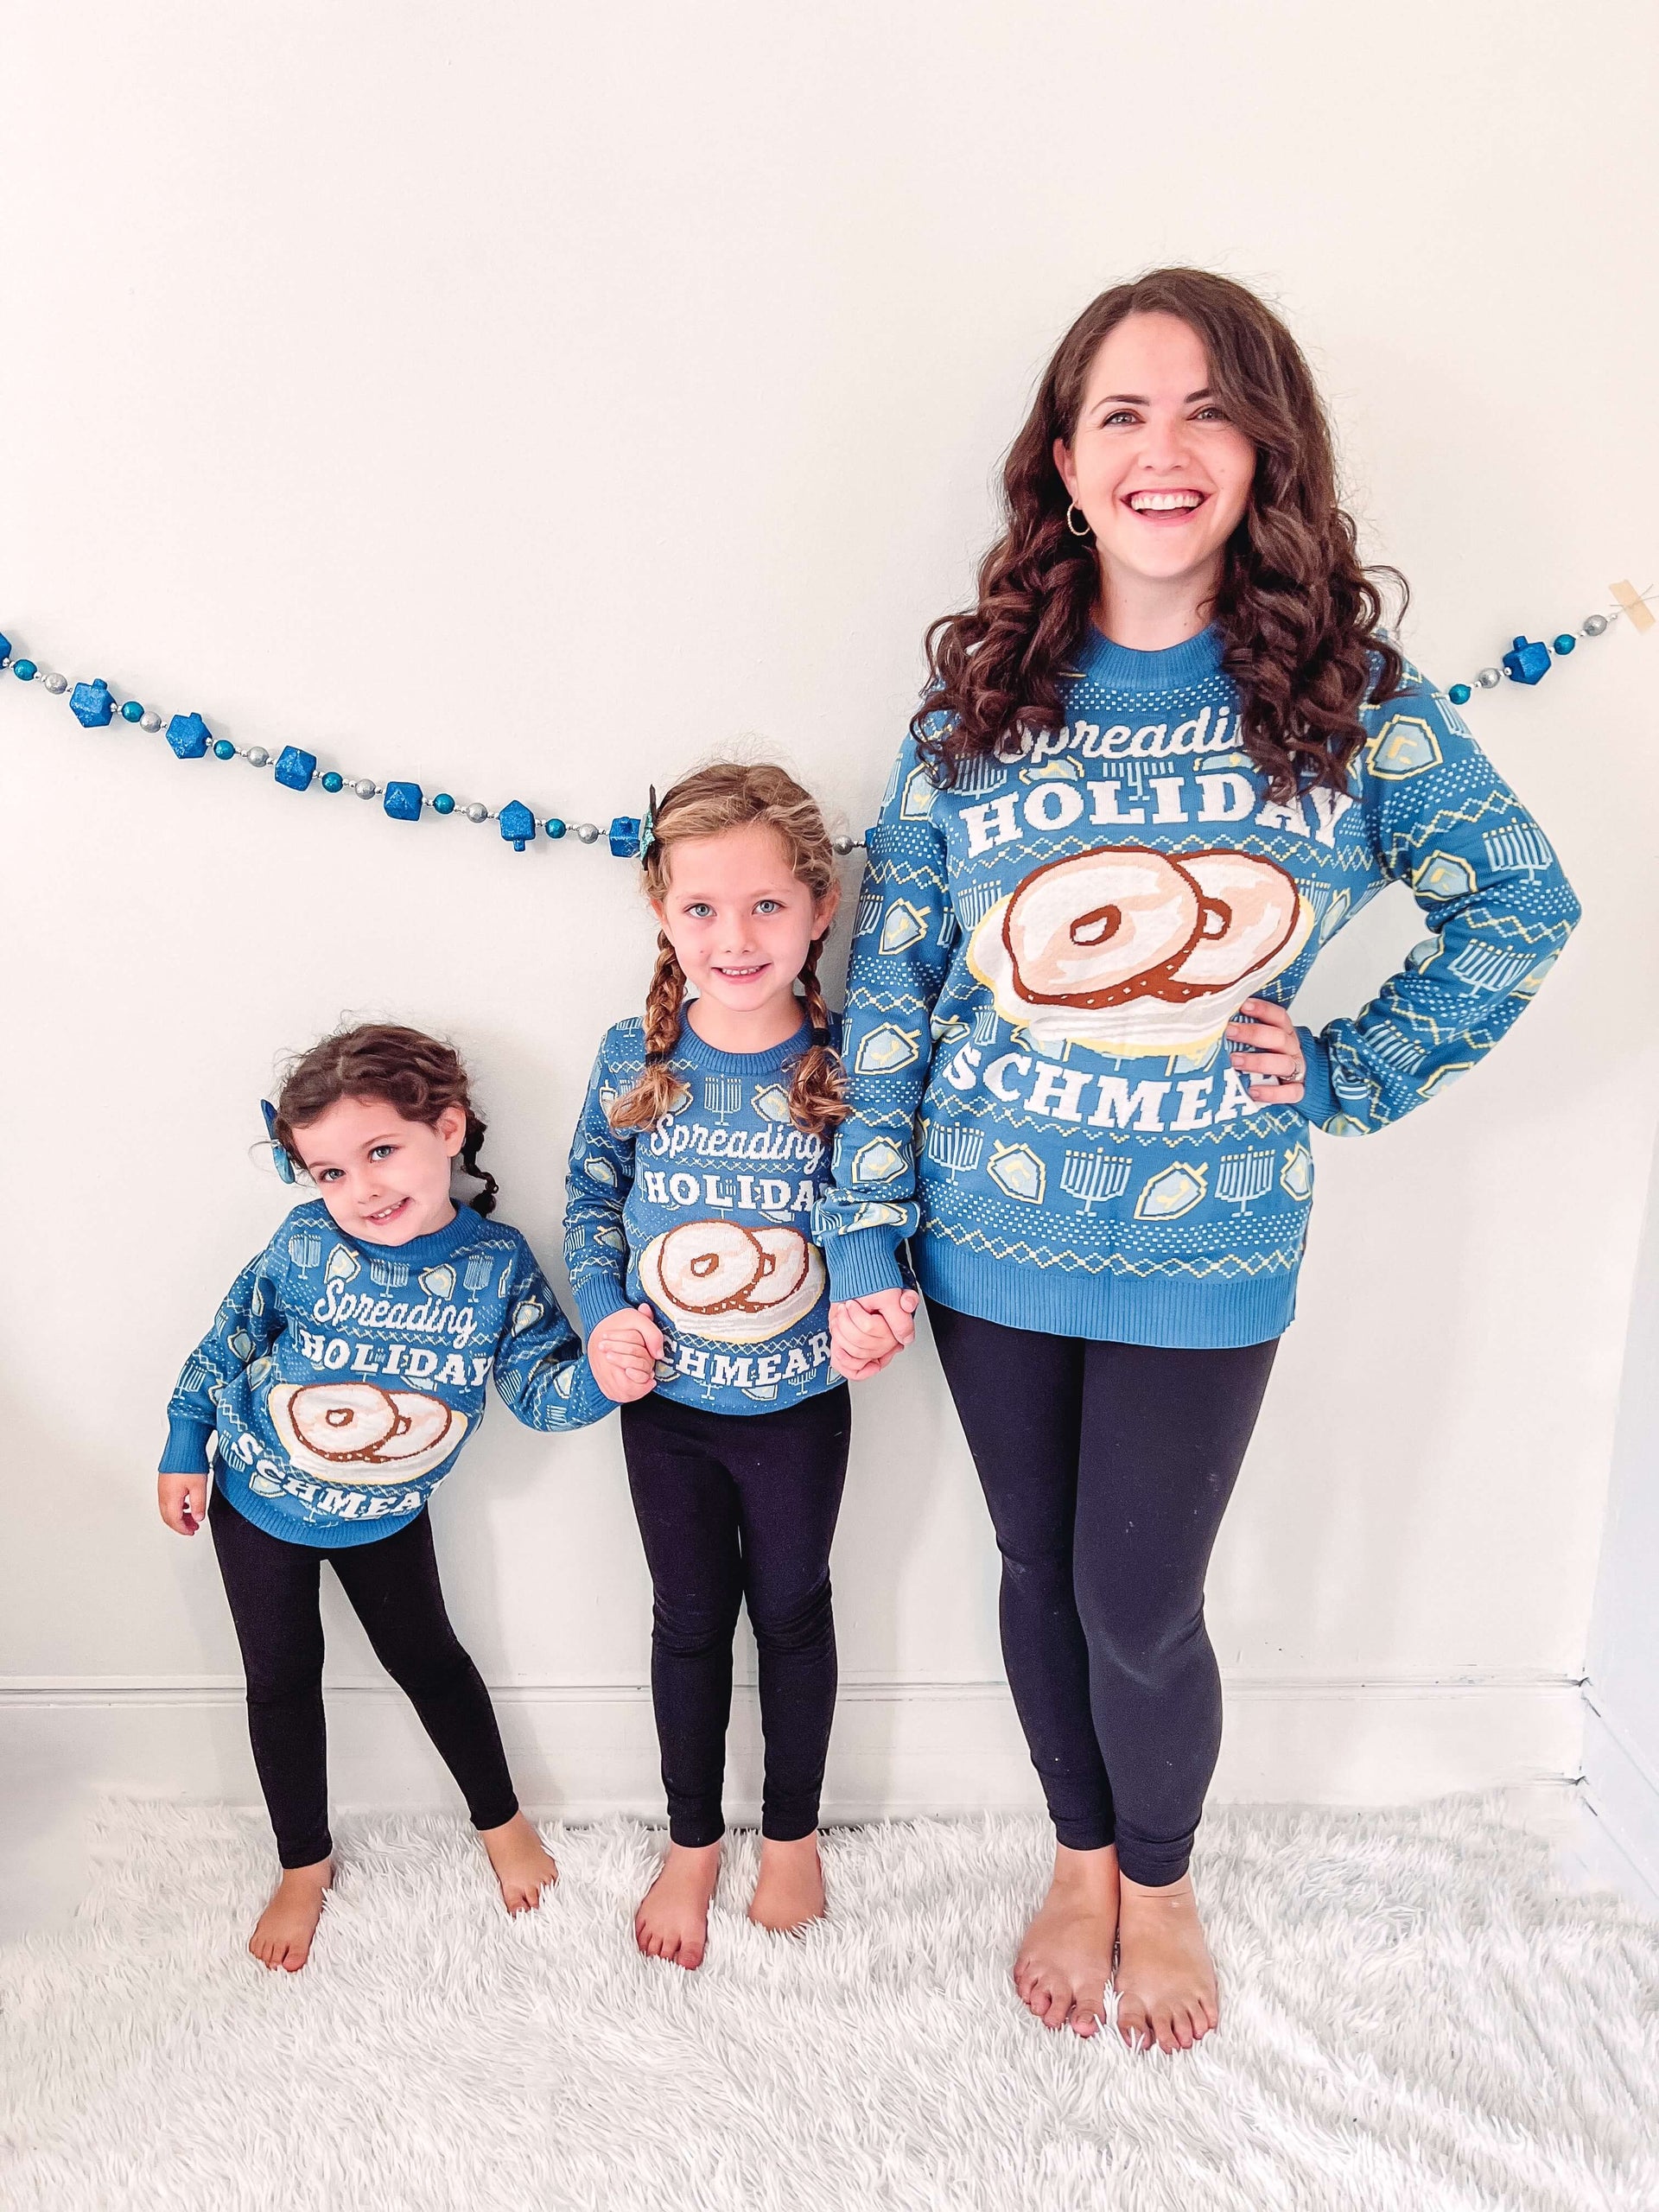 ModernTribe Sweaters Unisex Adult Holiday Schmear Sweater - by Tipsy Elves + ModernTribe - (Sizes XS - 5XL)